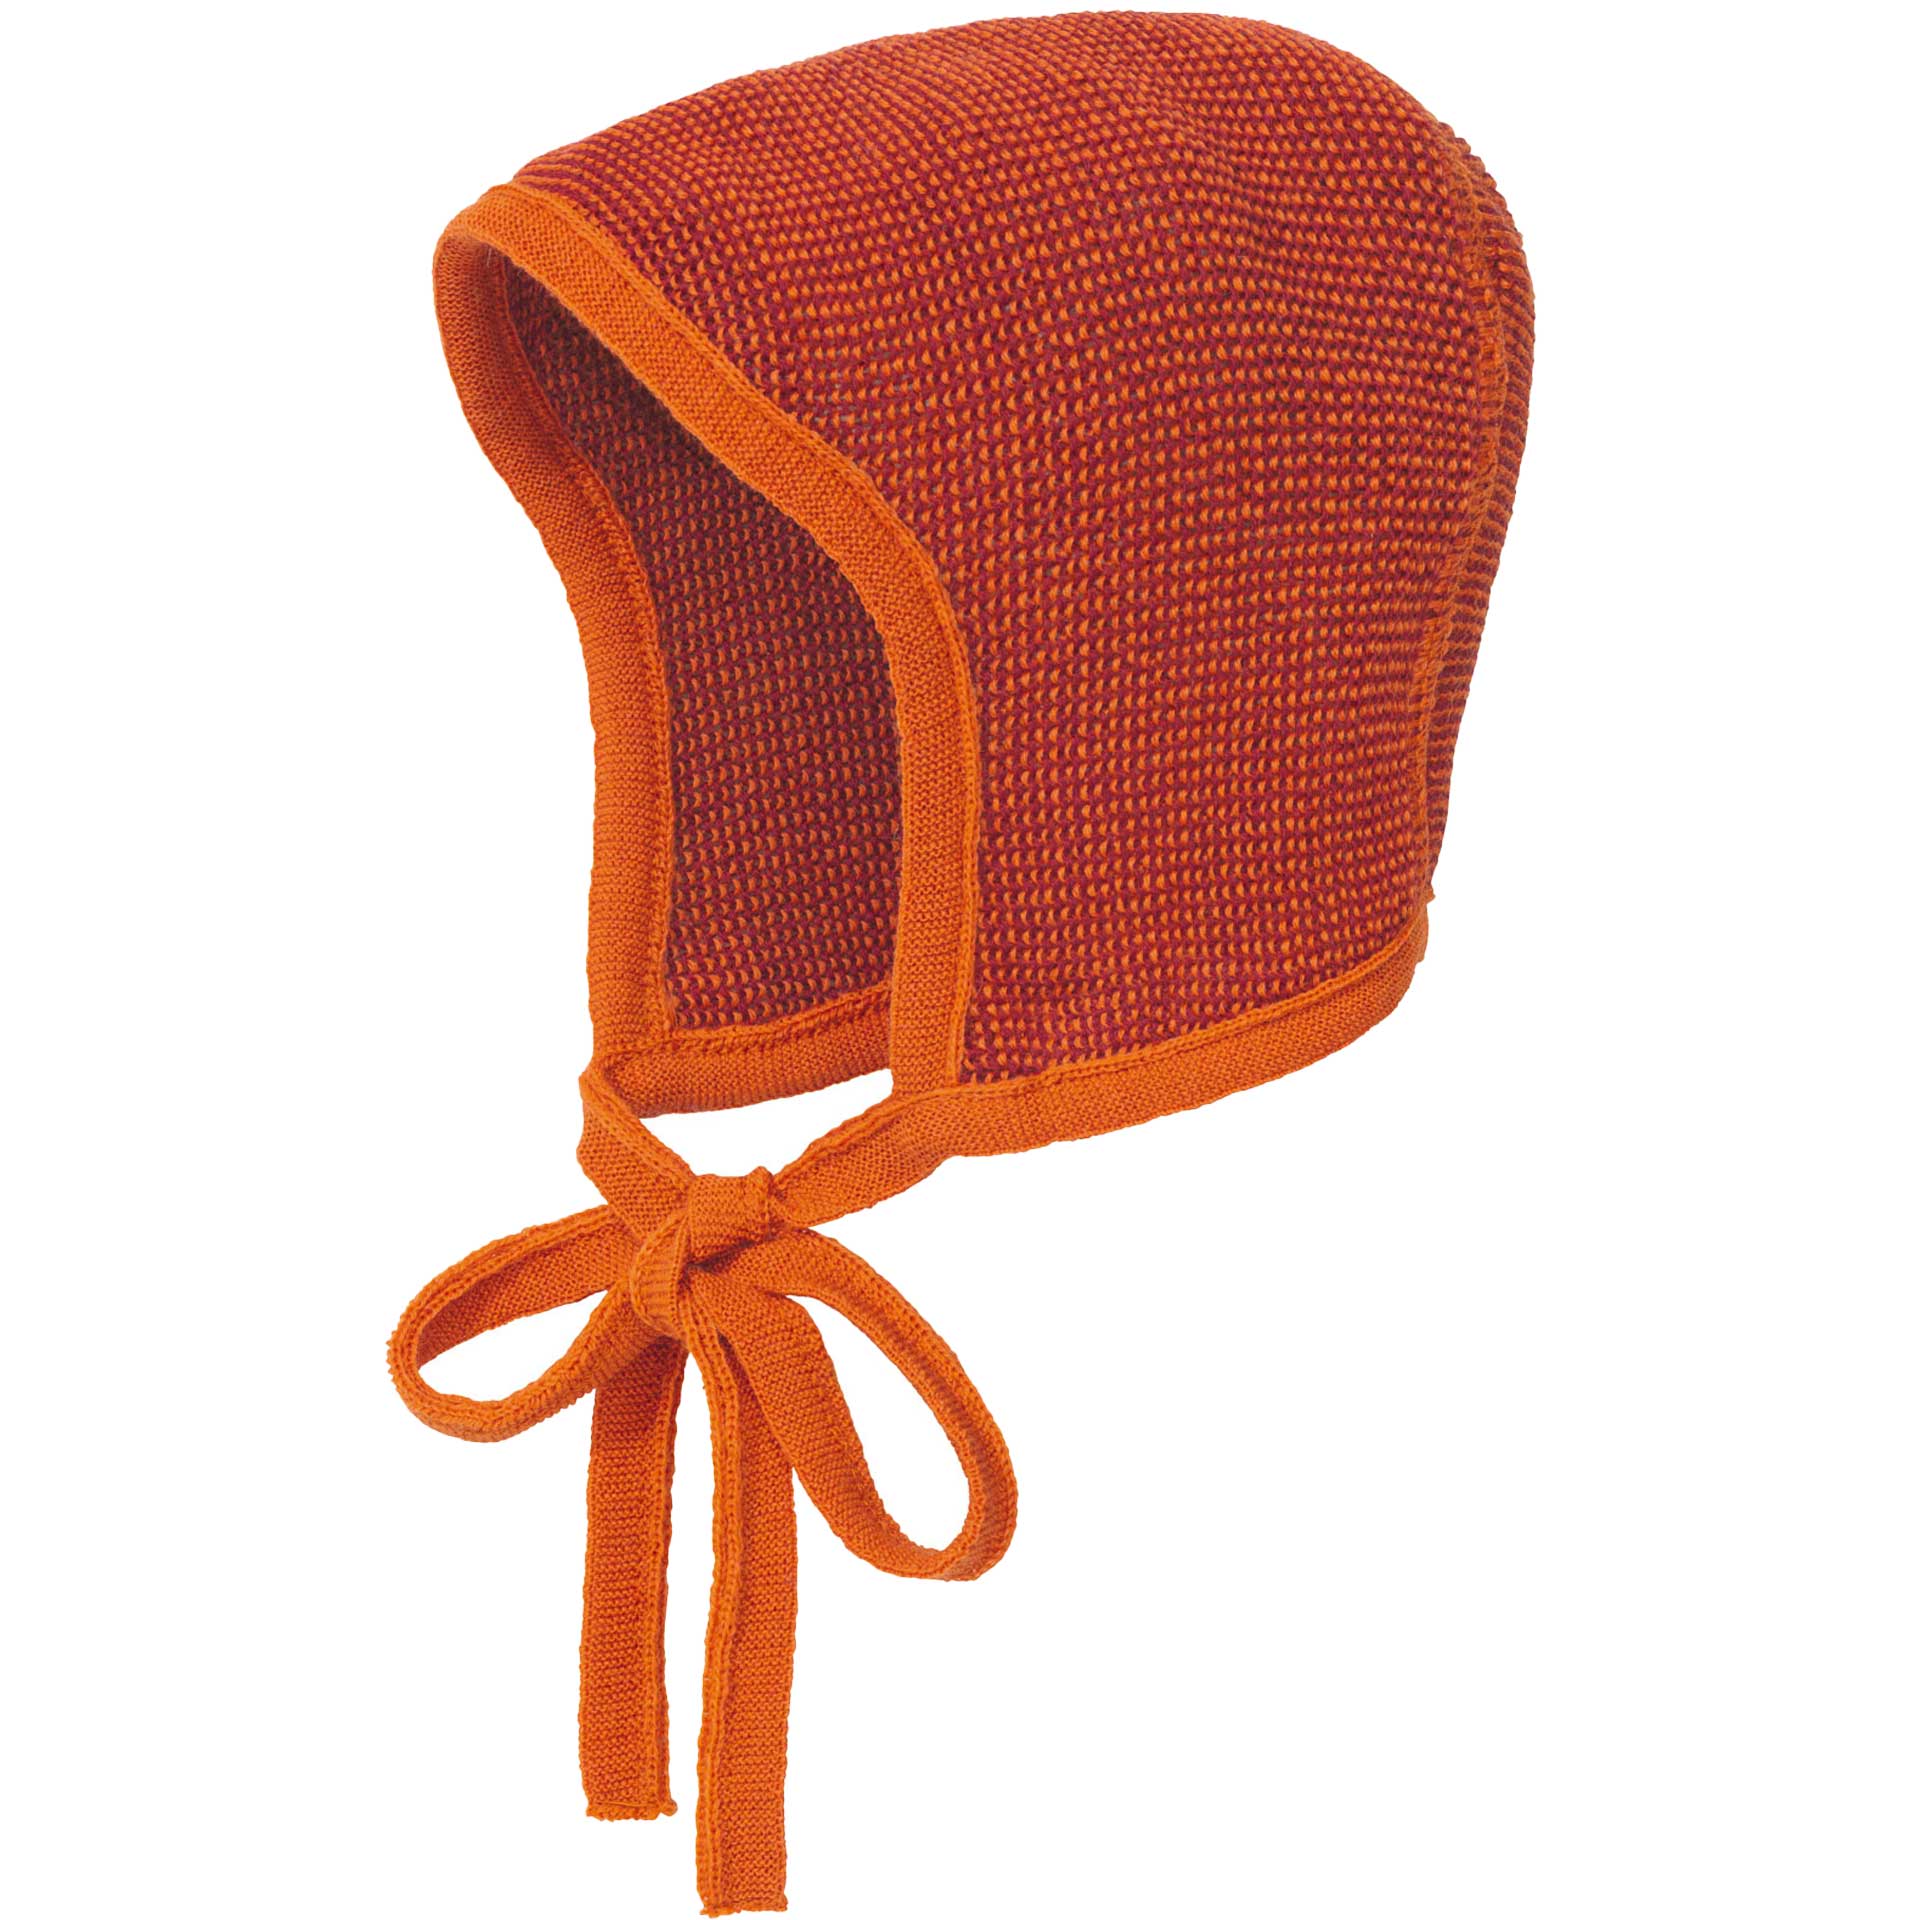 Knitted Bonnet *discontinued colour,Knitted Bonnet - discontinued colour